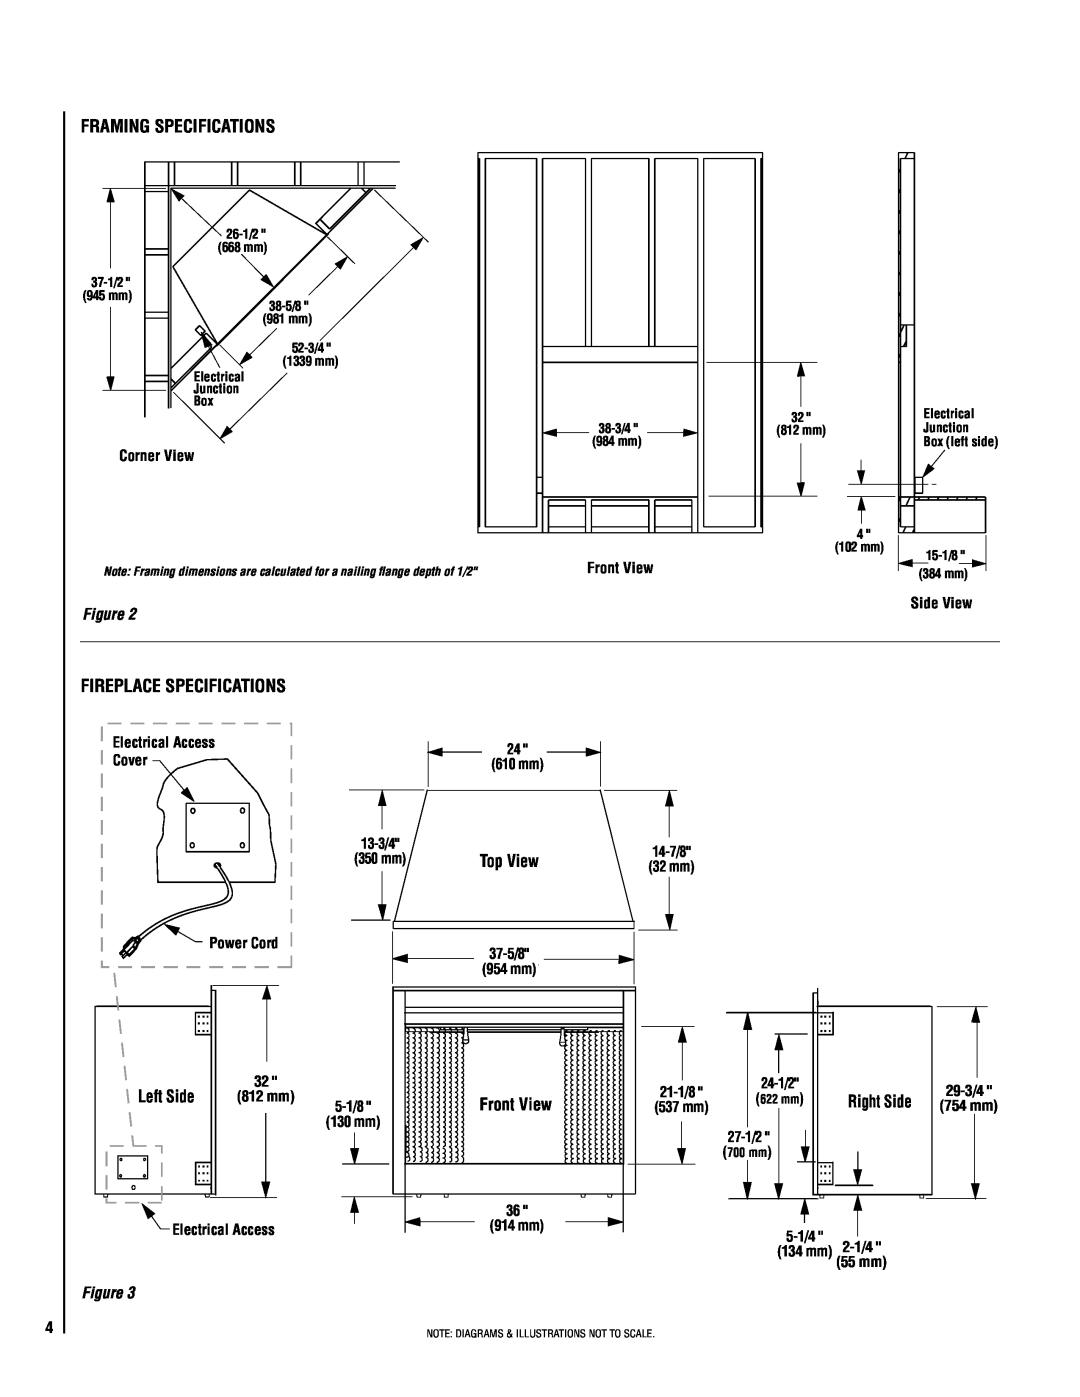 Lennox Hearth MPE-36R warranty Framing Specifications, Fireplace specifications, Left Side, Top View, Front View 